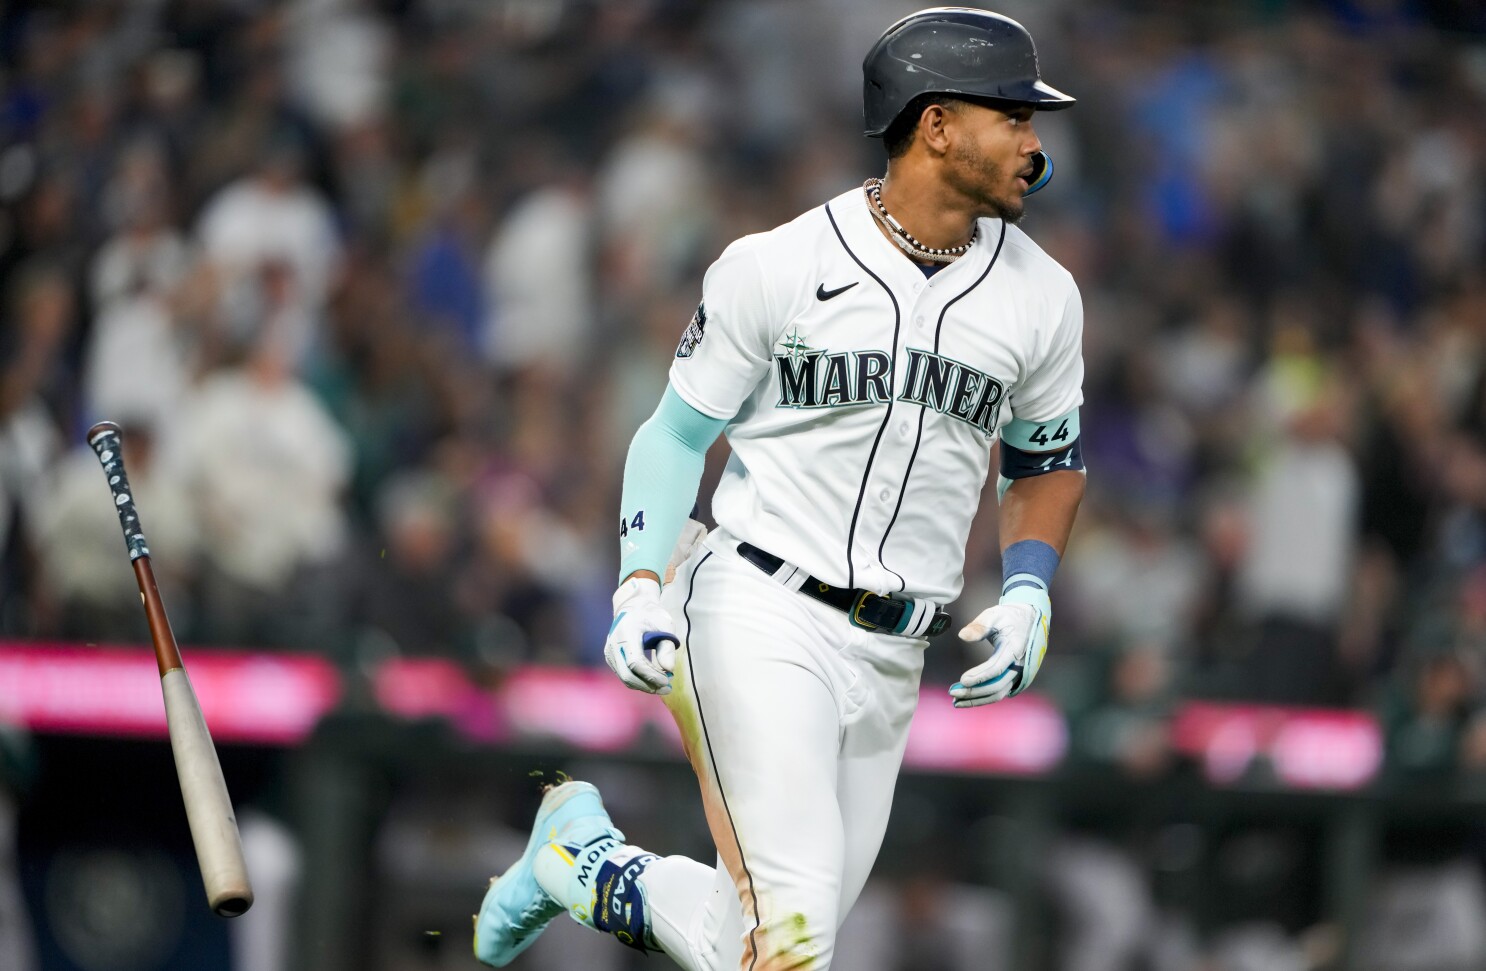 Mariners CF Julio Rodríguez out of lineup for second straight day